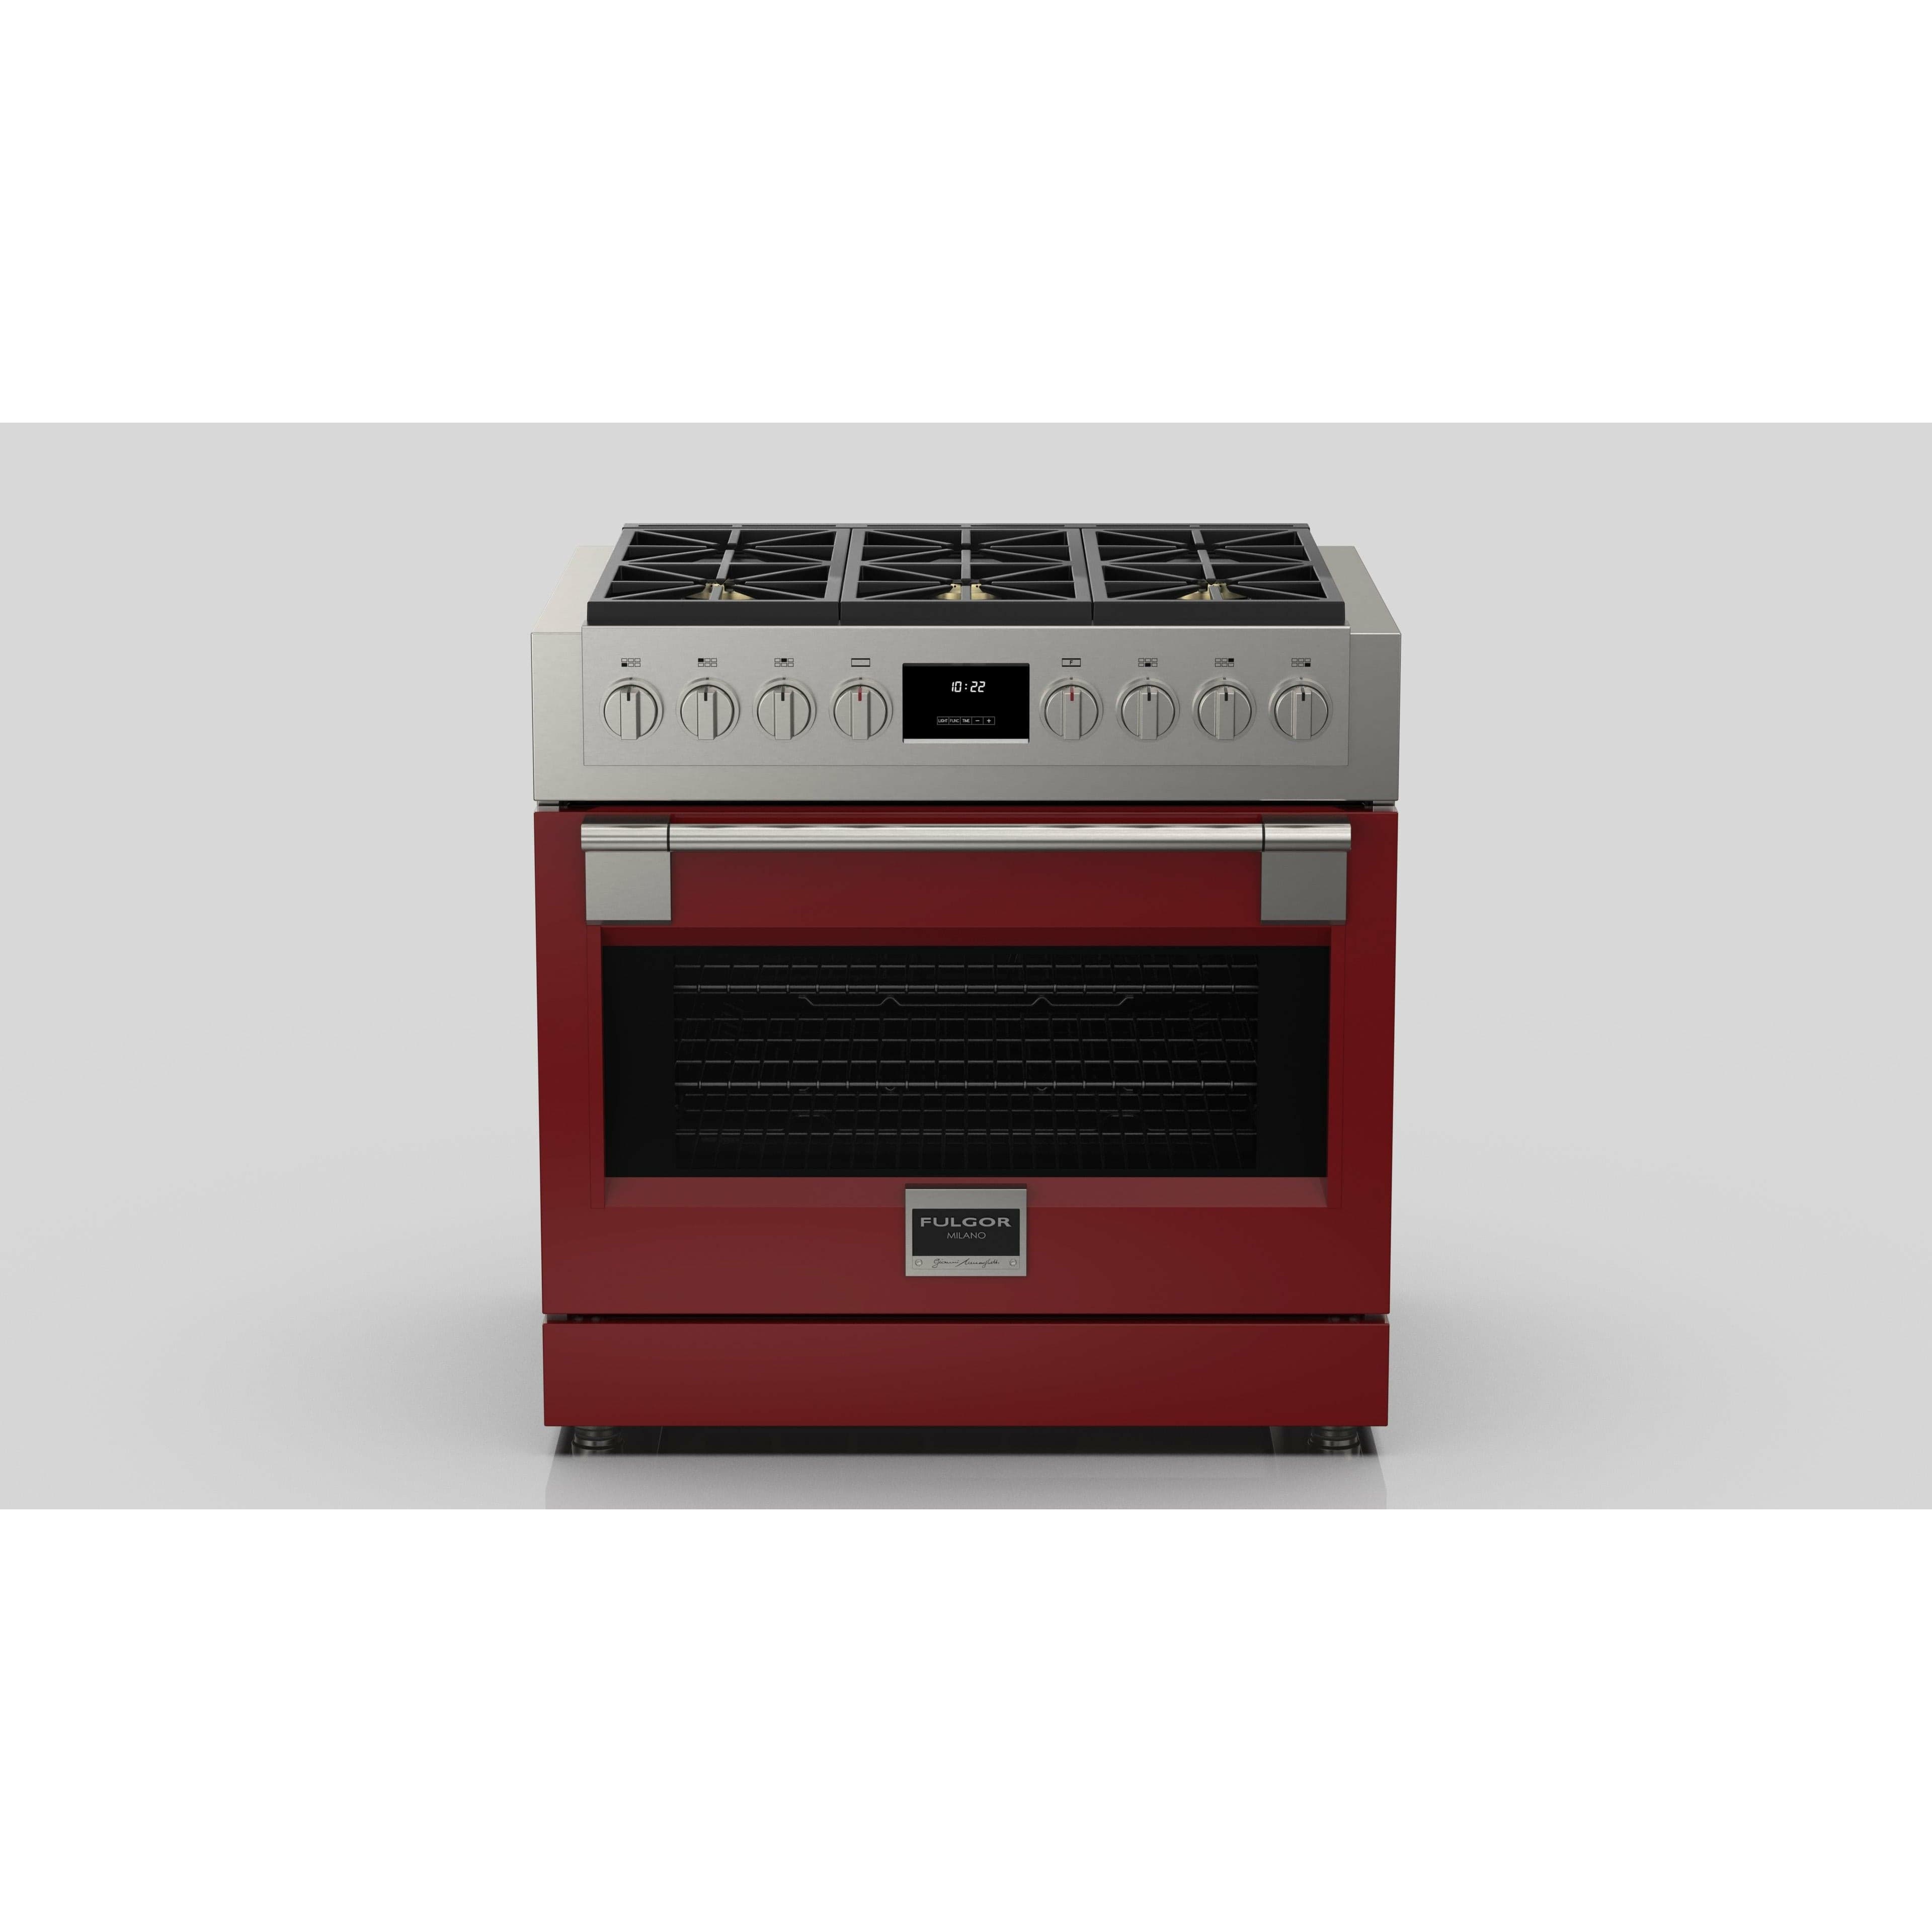 Fulgor Milano 36" Professional Gas Range with 6 Dual-Flame Burners, 5.7 cu. ft. Capacity, Stainless Steel - F6PGR366S2 Ranges PDRKIT36RD Luxury Appliances Direct